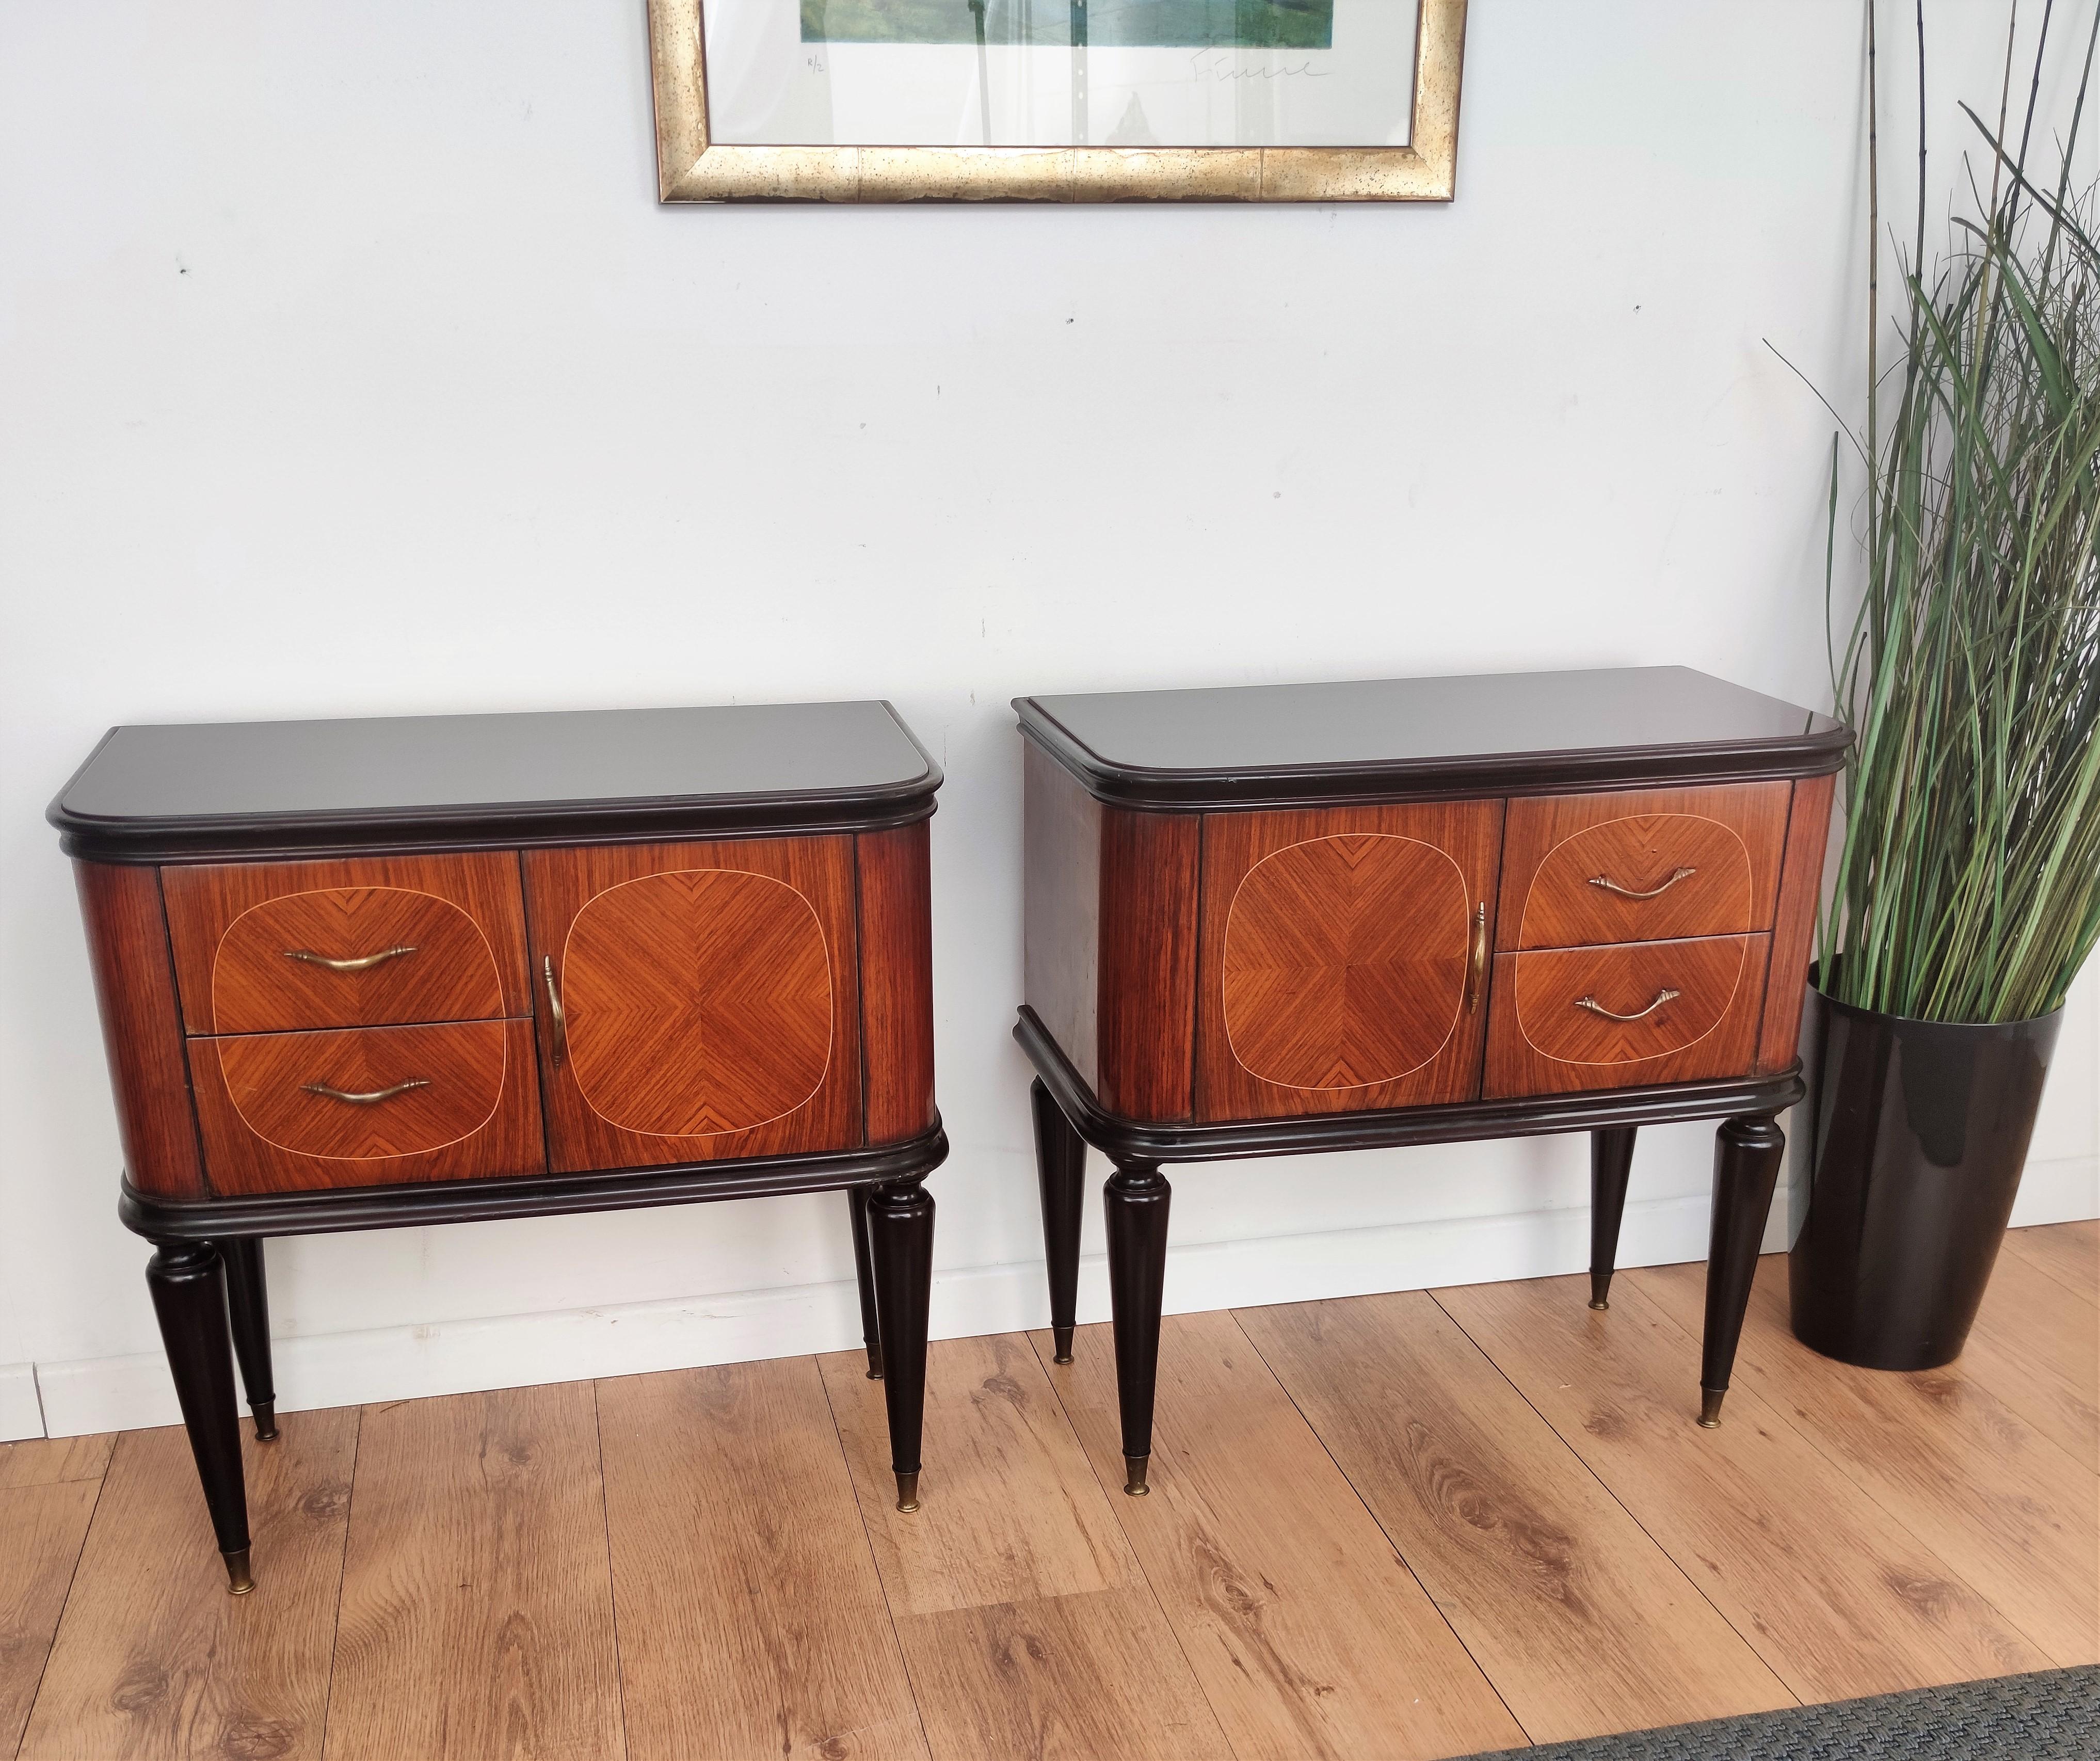 Very elegant and refined Italian 1950s pair of bed side tables with front door and great pattern decor design of the walnut veneer wood with one front door and two drawers. Great finish such as the brass handles and leg ends and the beautiful framed